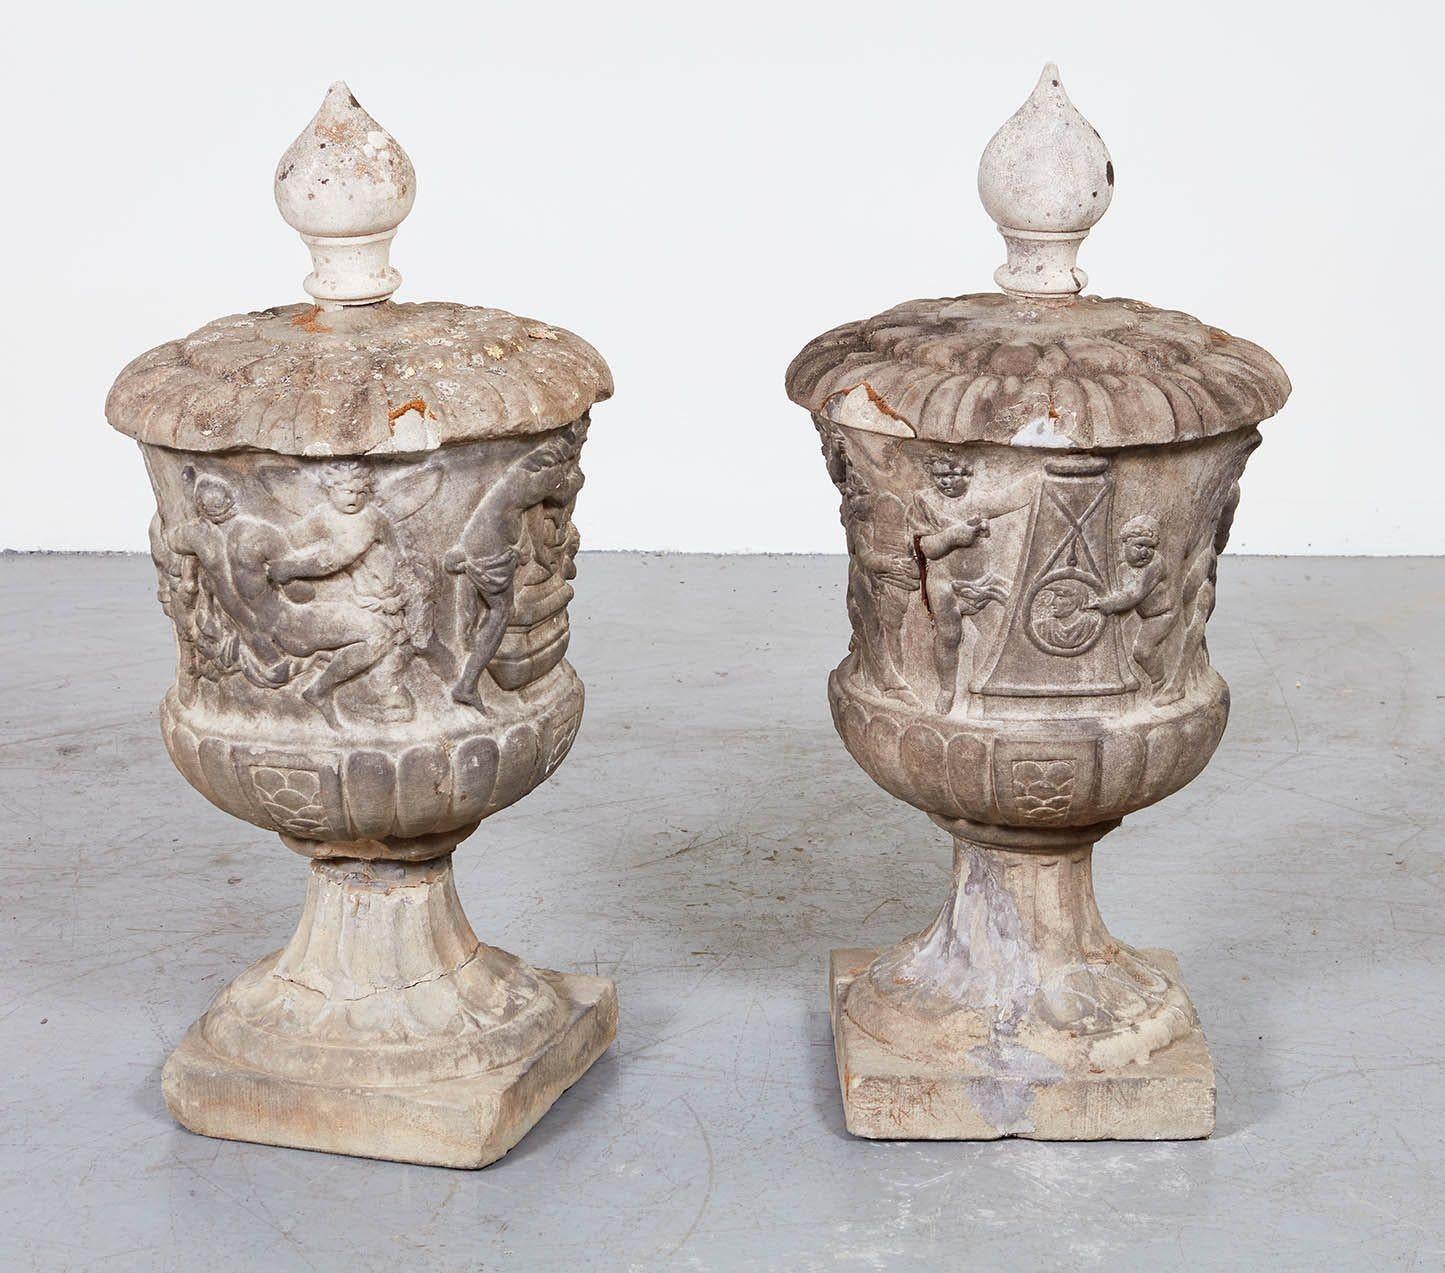 Baroque Rare and Important Pair of 17th c. Carved Marble Urns For Sale